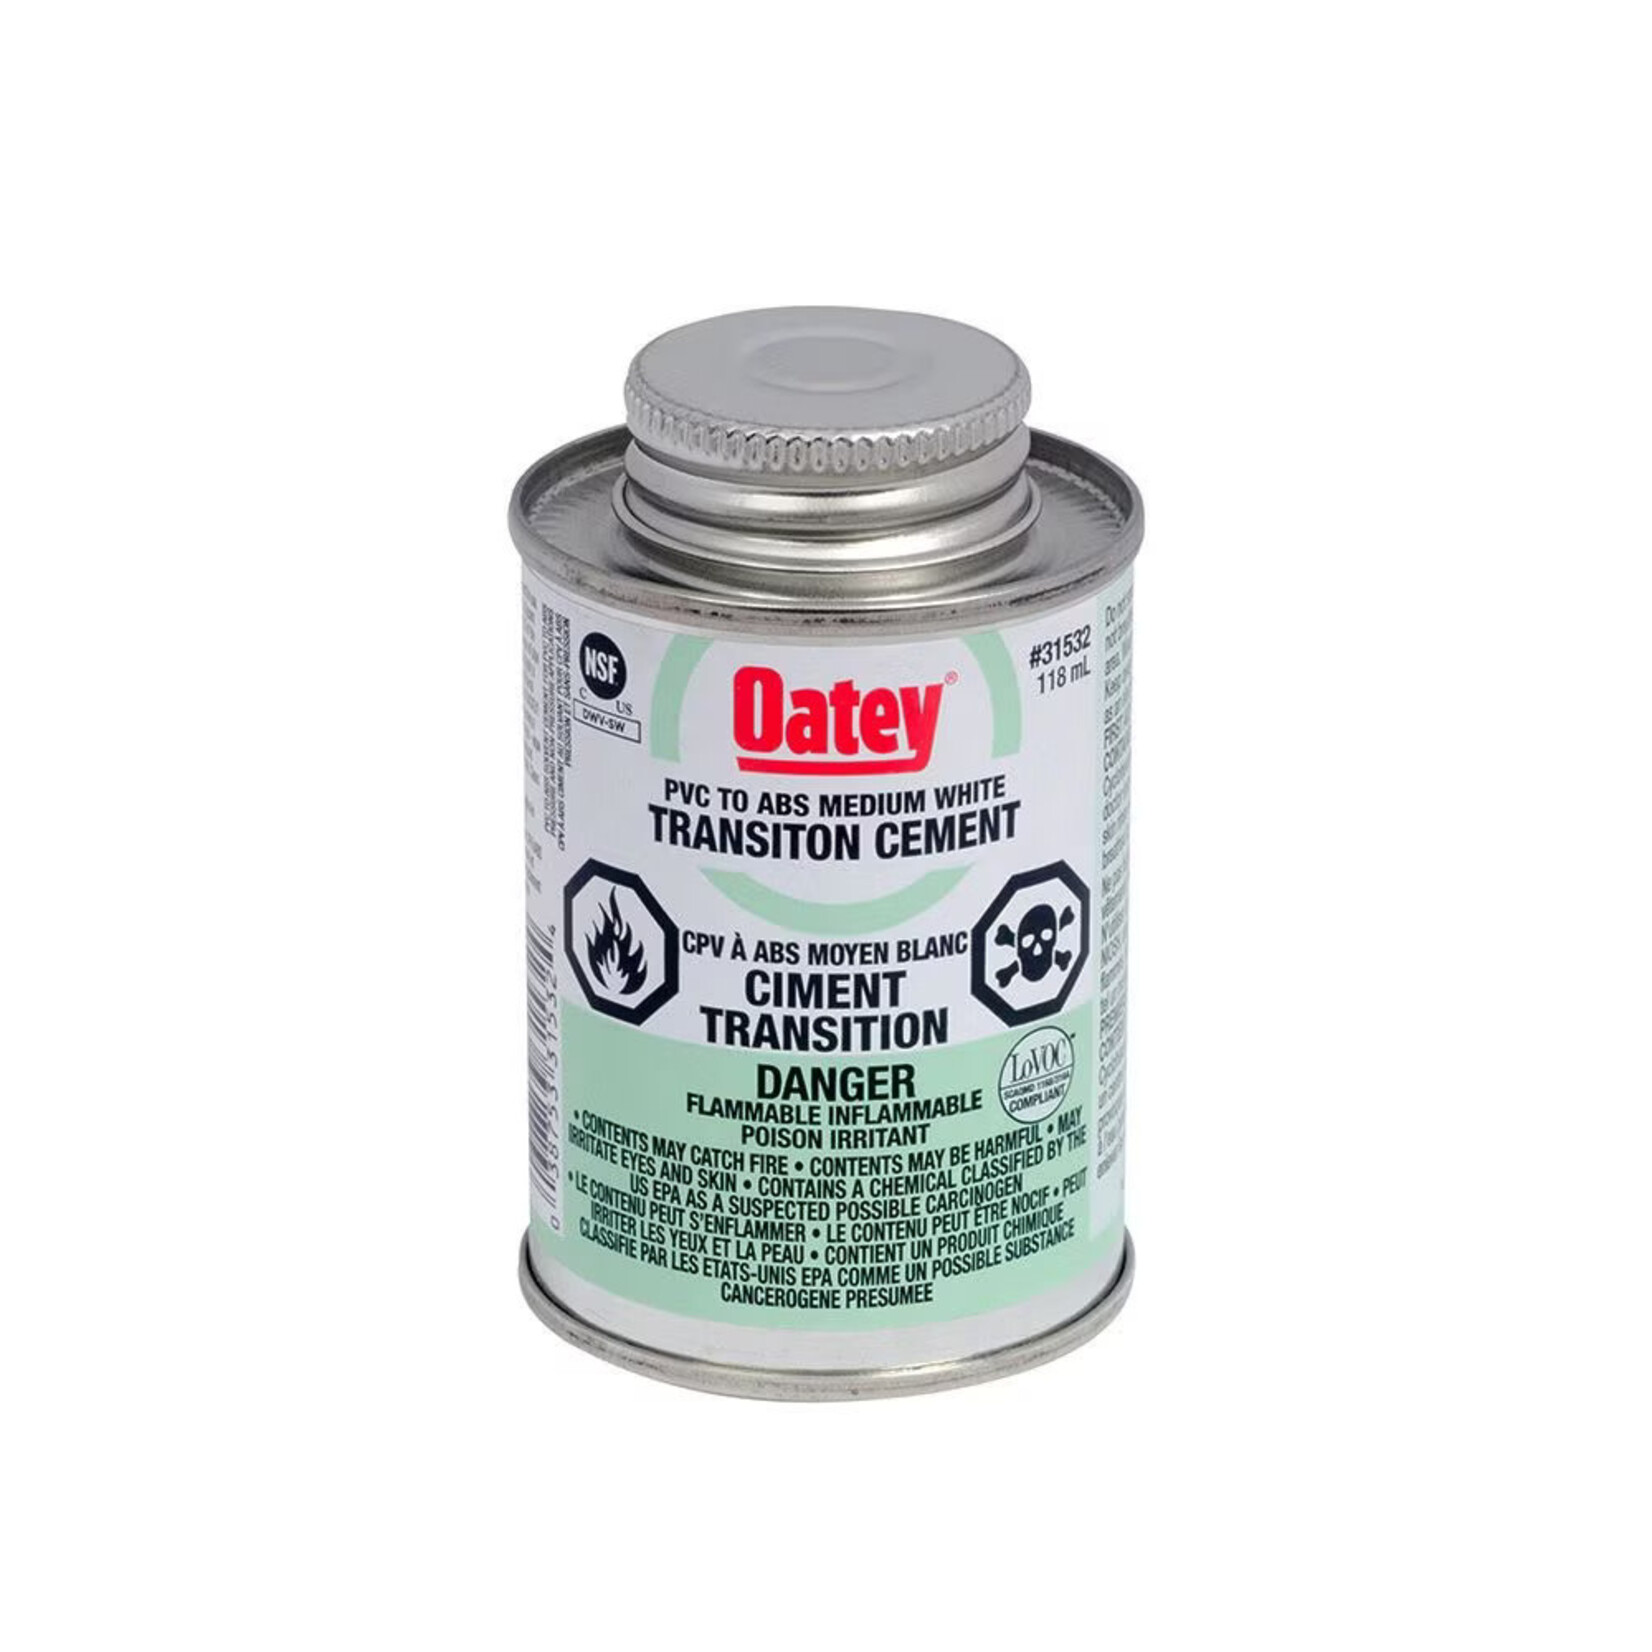 Oatey PVC to ABS Transition Cement - White - 118ml